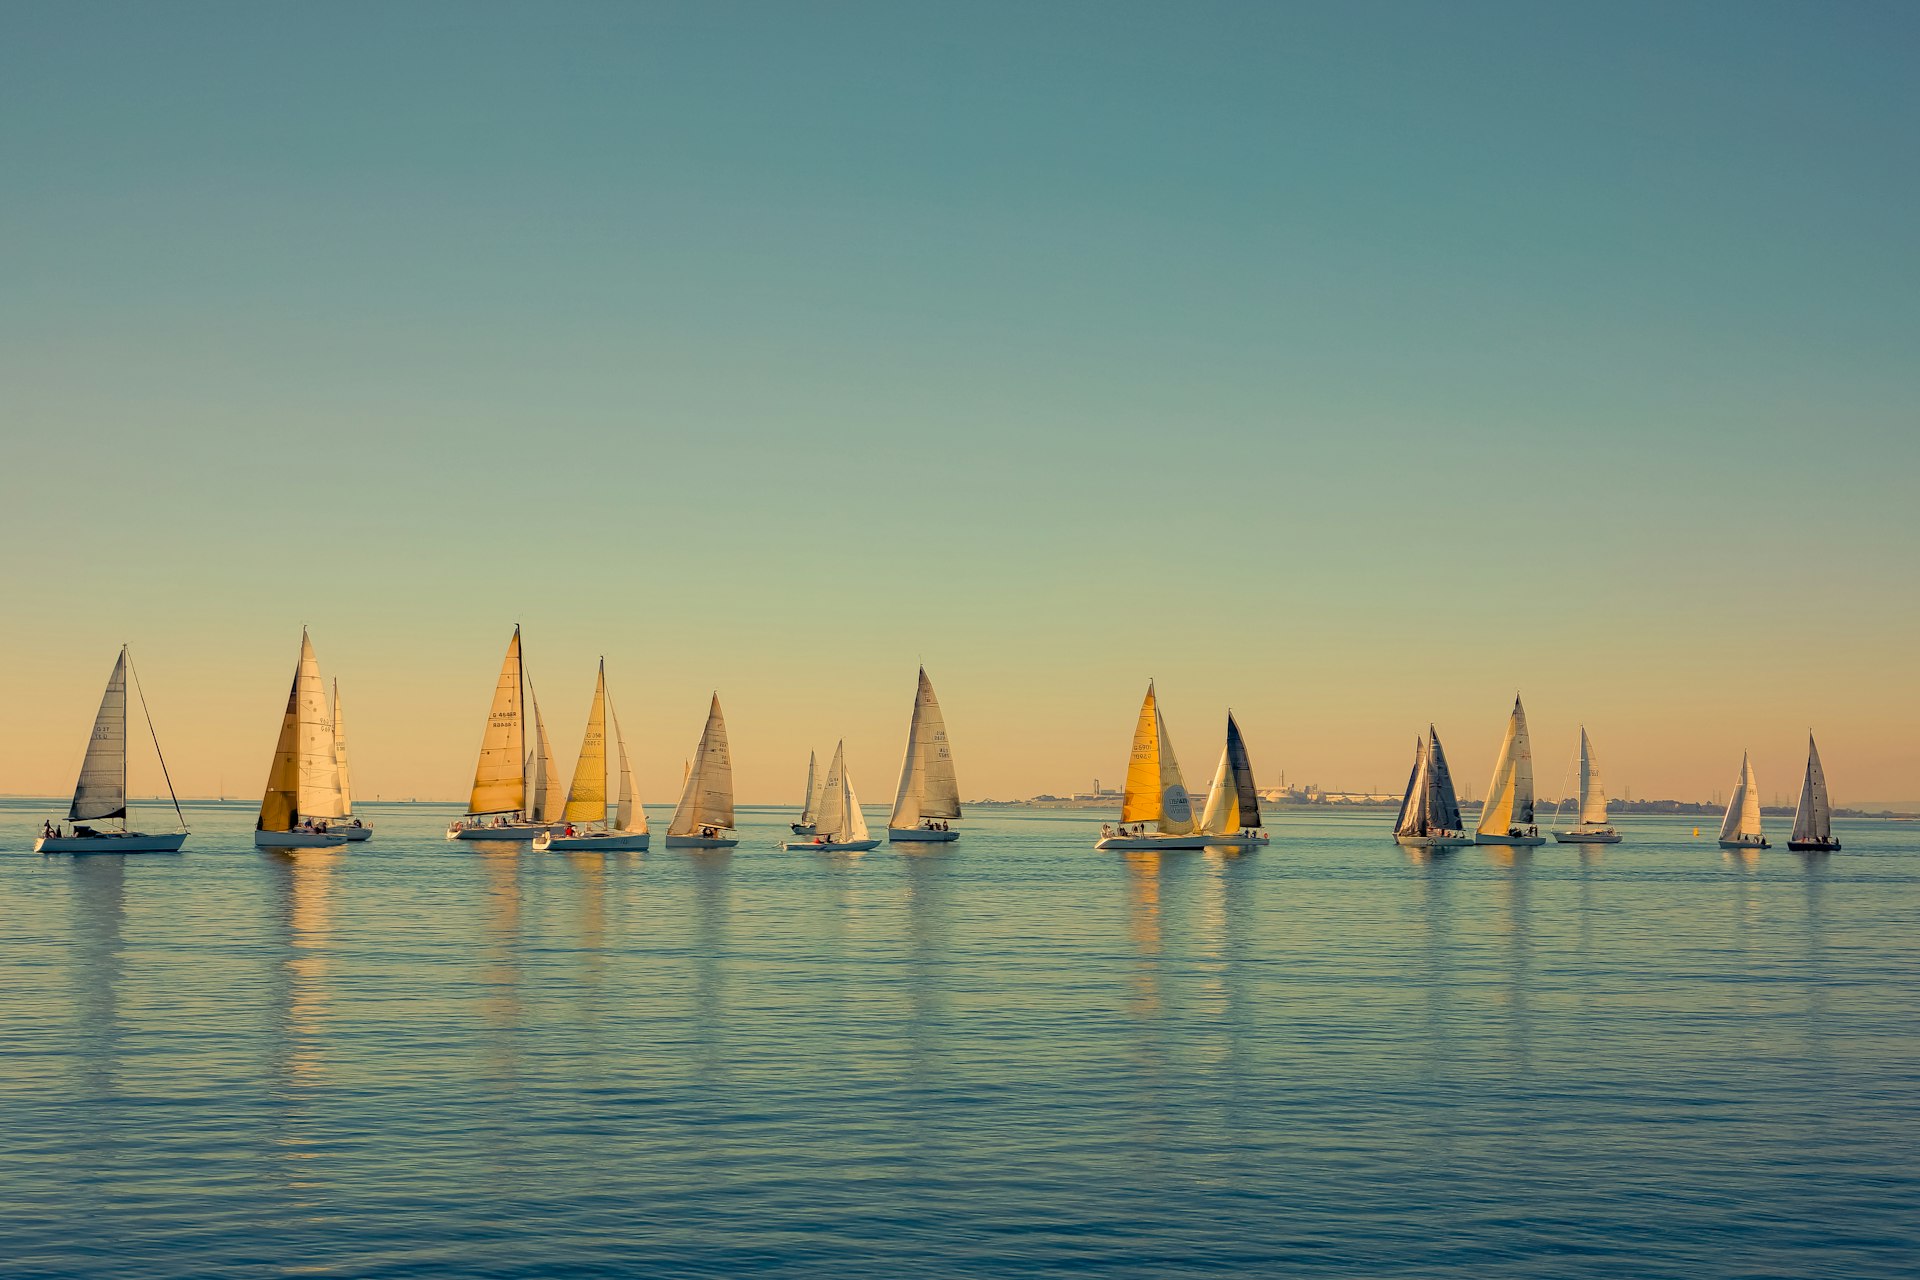 Sailboats scattered on the ocean, seen from The Pier in Geelong, Australia 